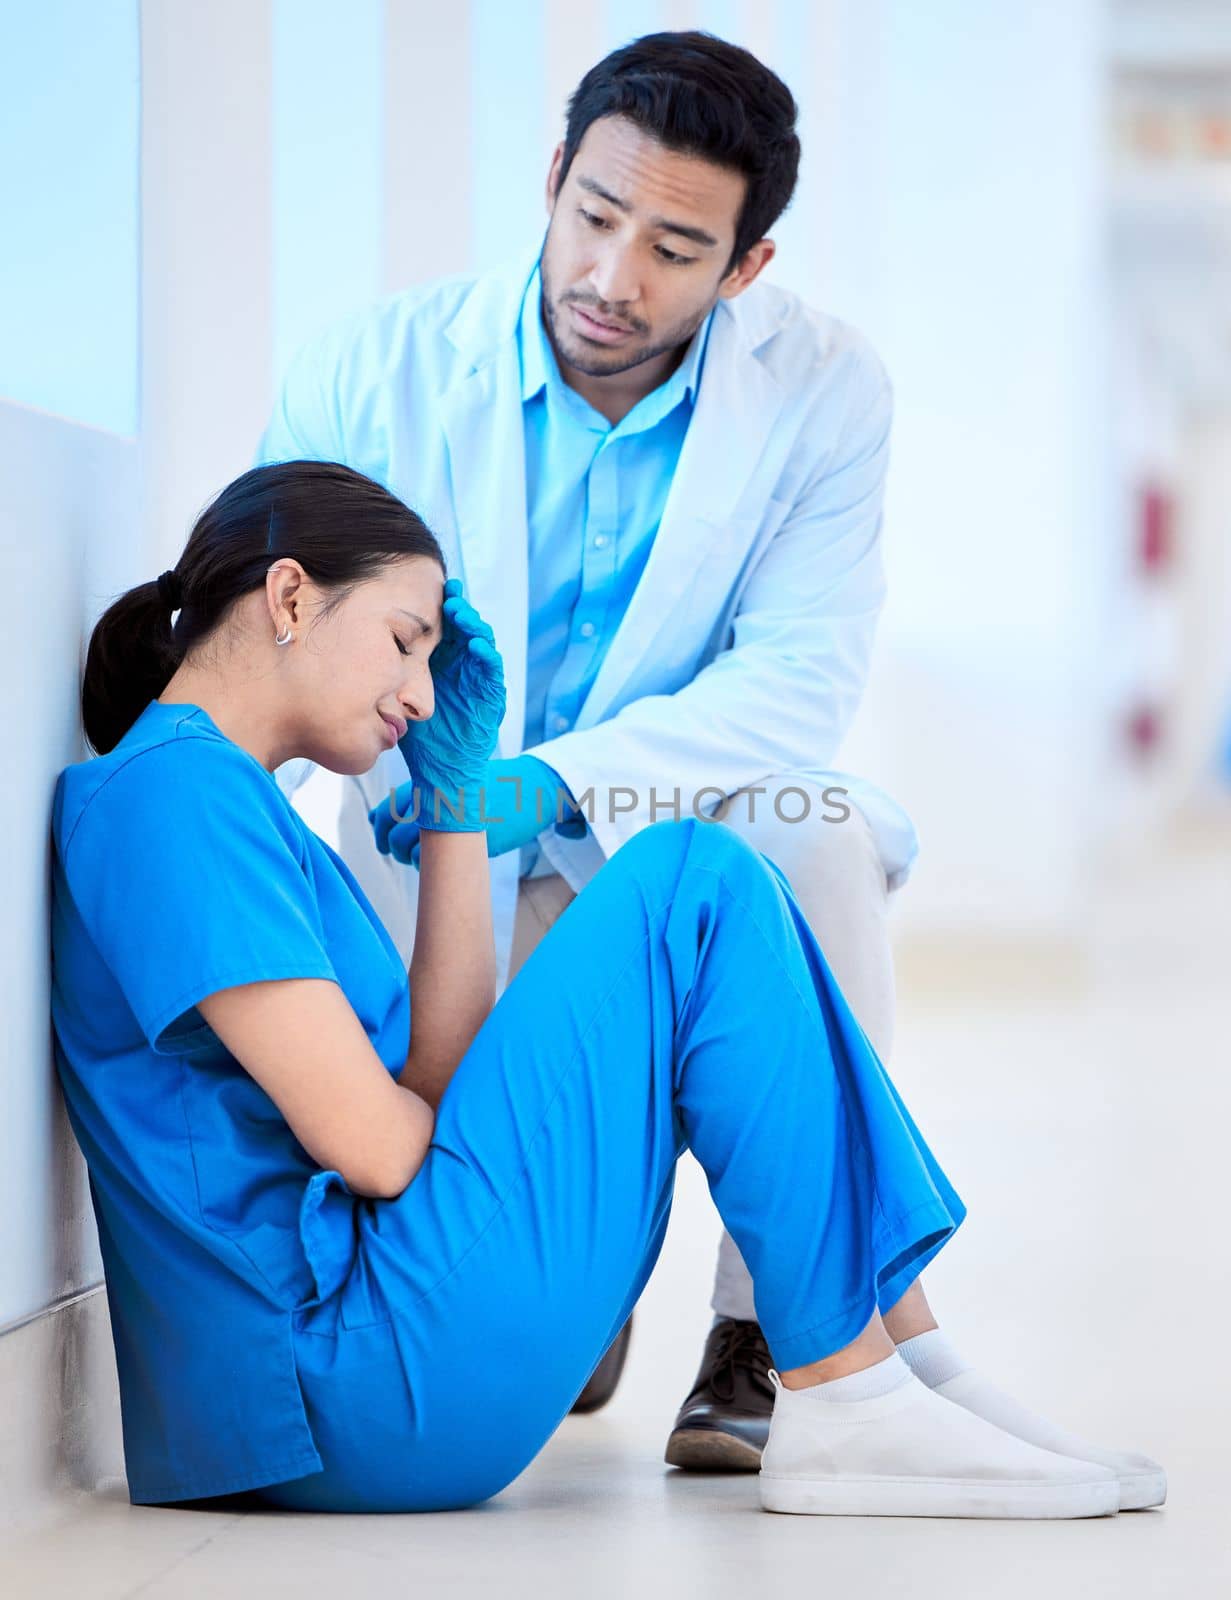 Being a doctor is never easy. a young male dentist offering comfort to his assistant